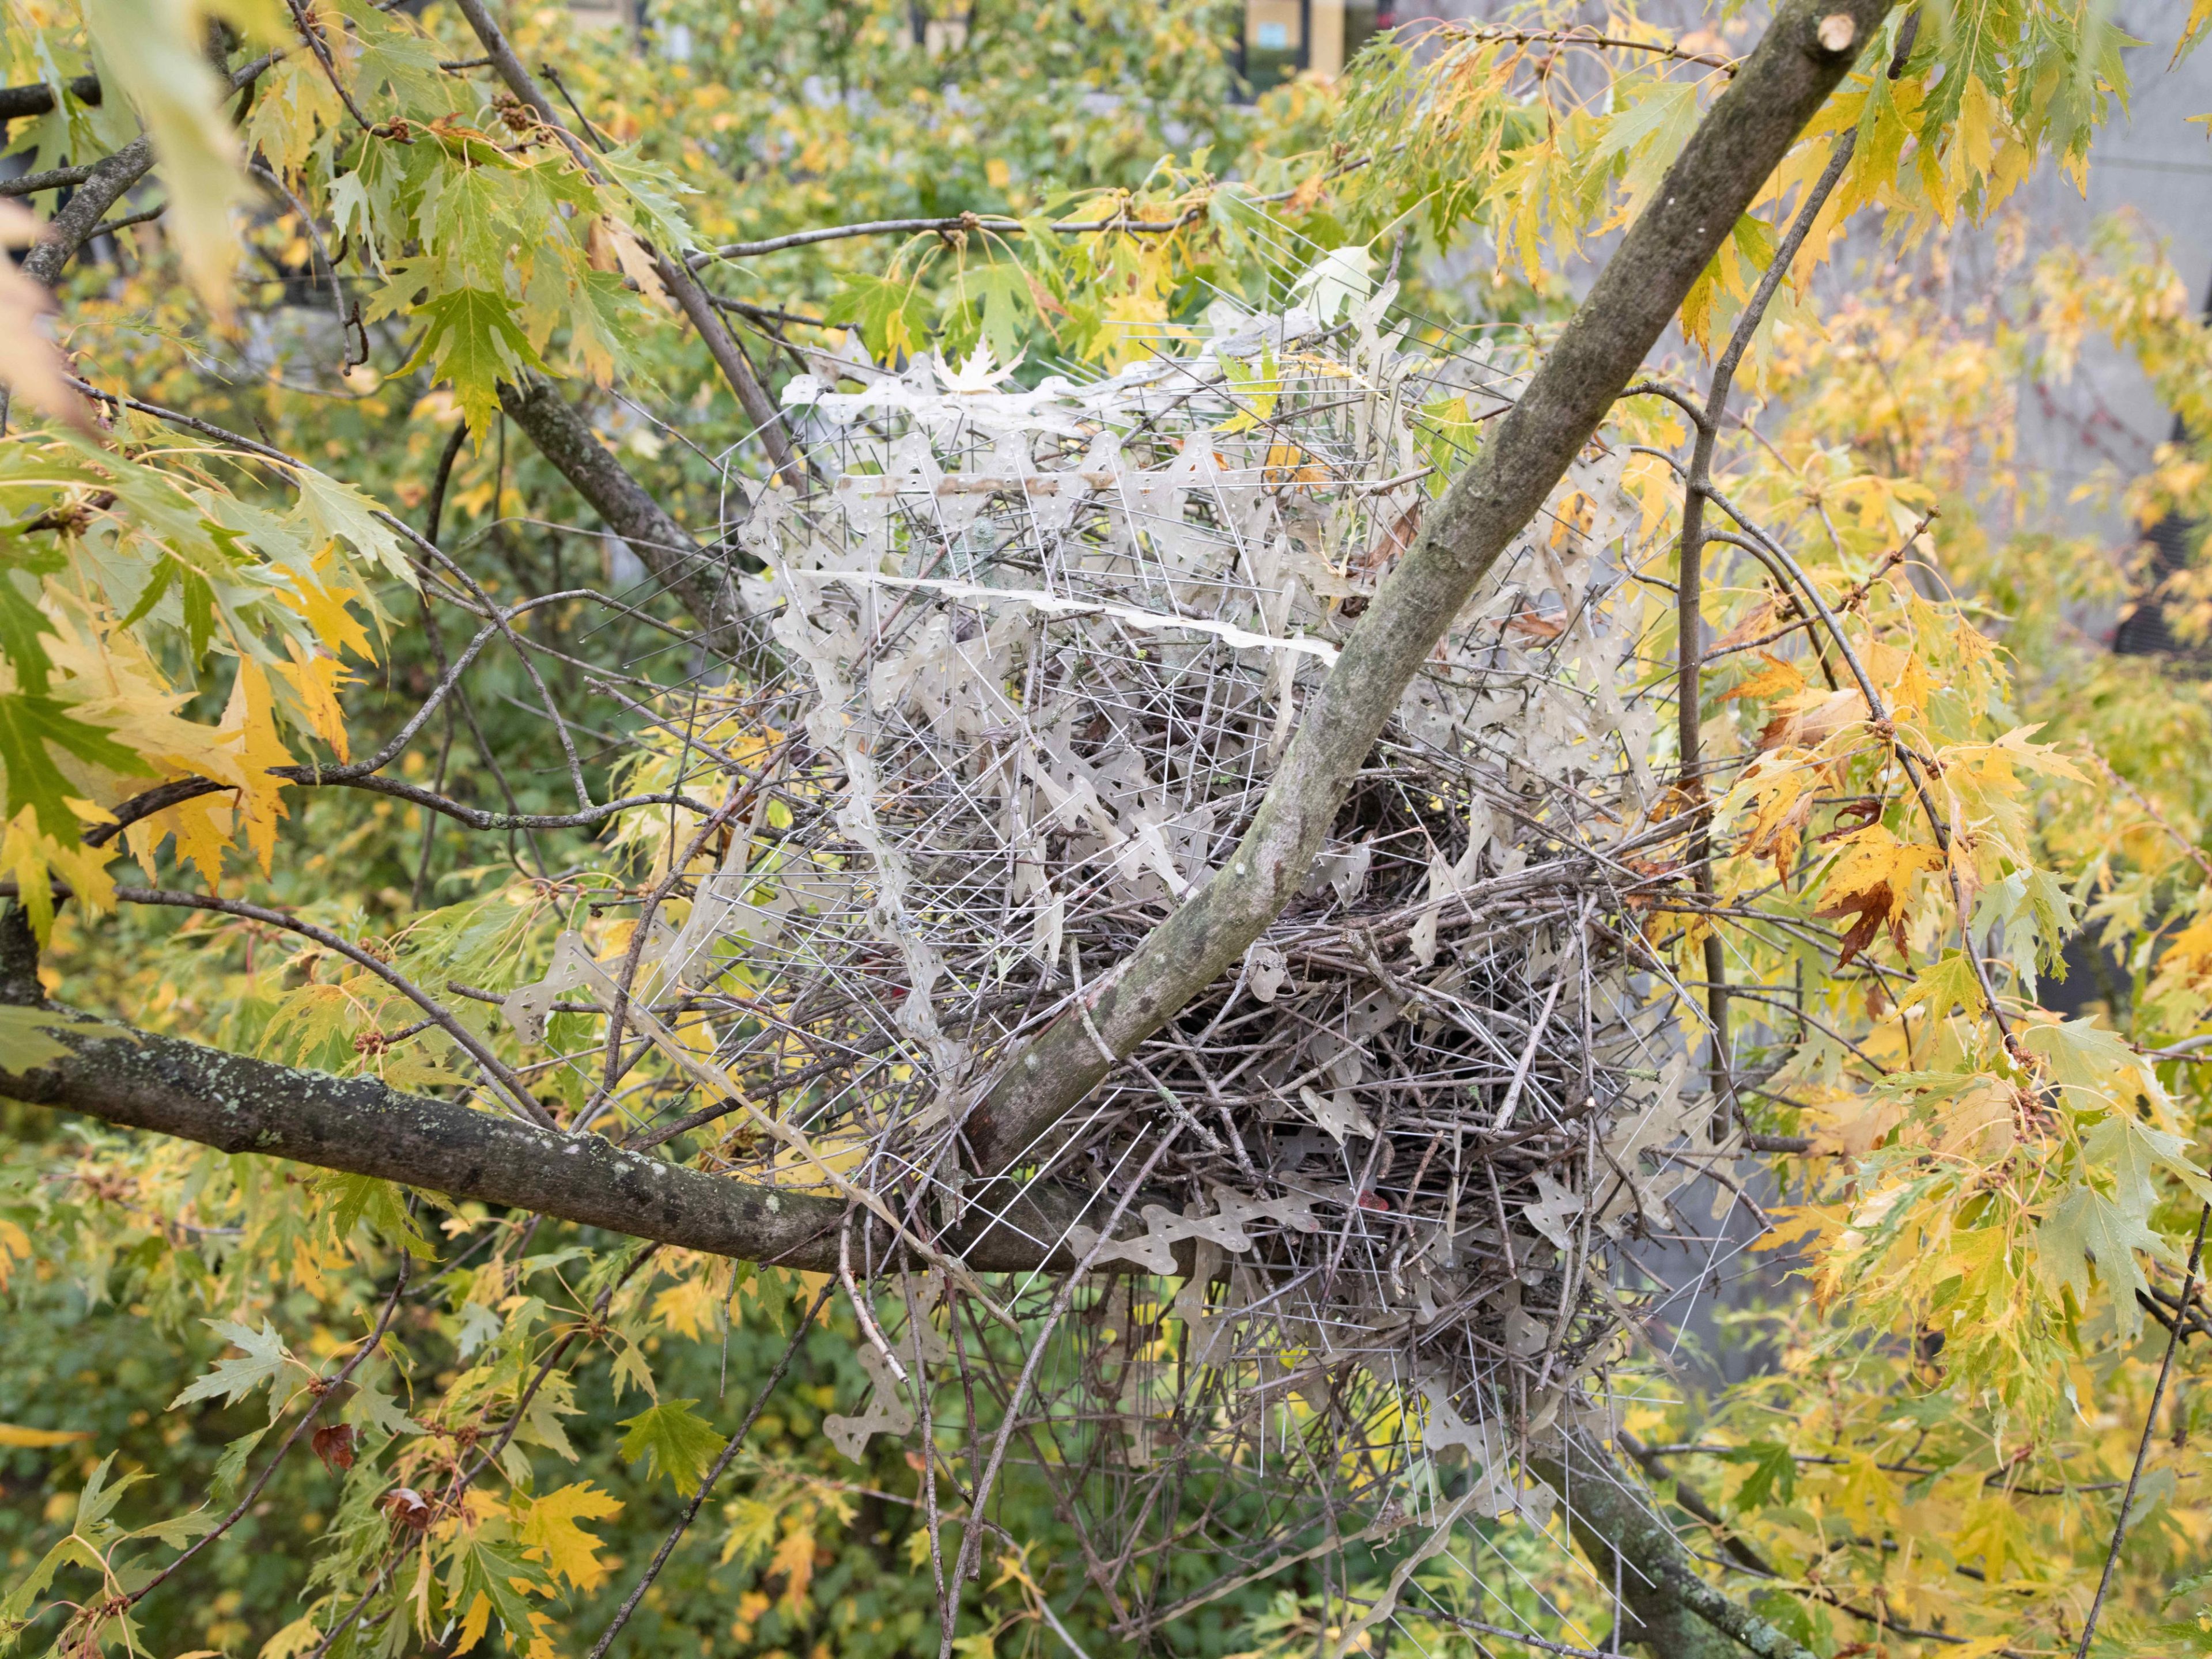 a magpie nest in a tree. the nest is built from a bunch of anti-bird spikes, which are long spiky needles attached to strips.